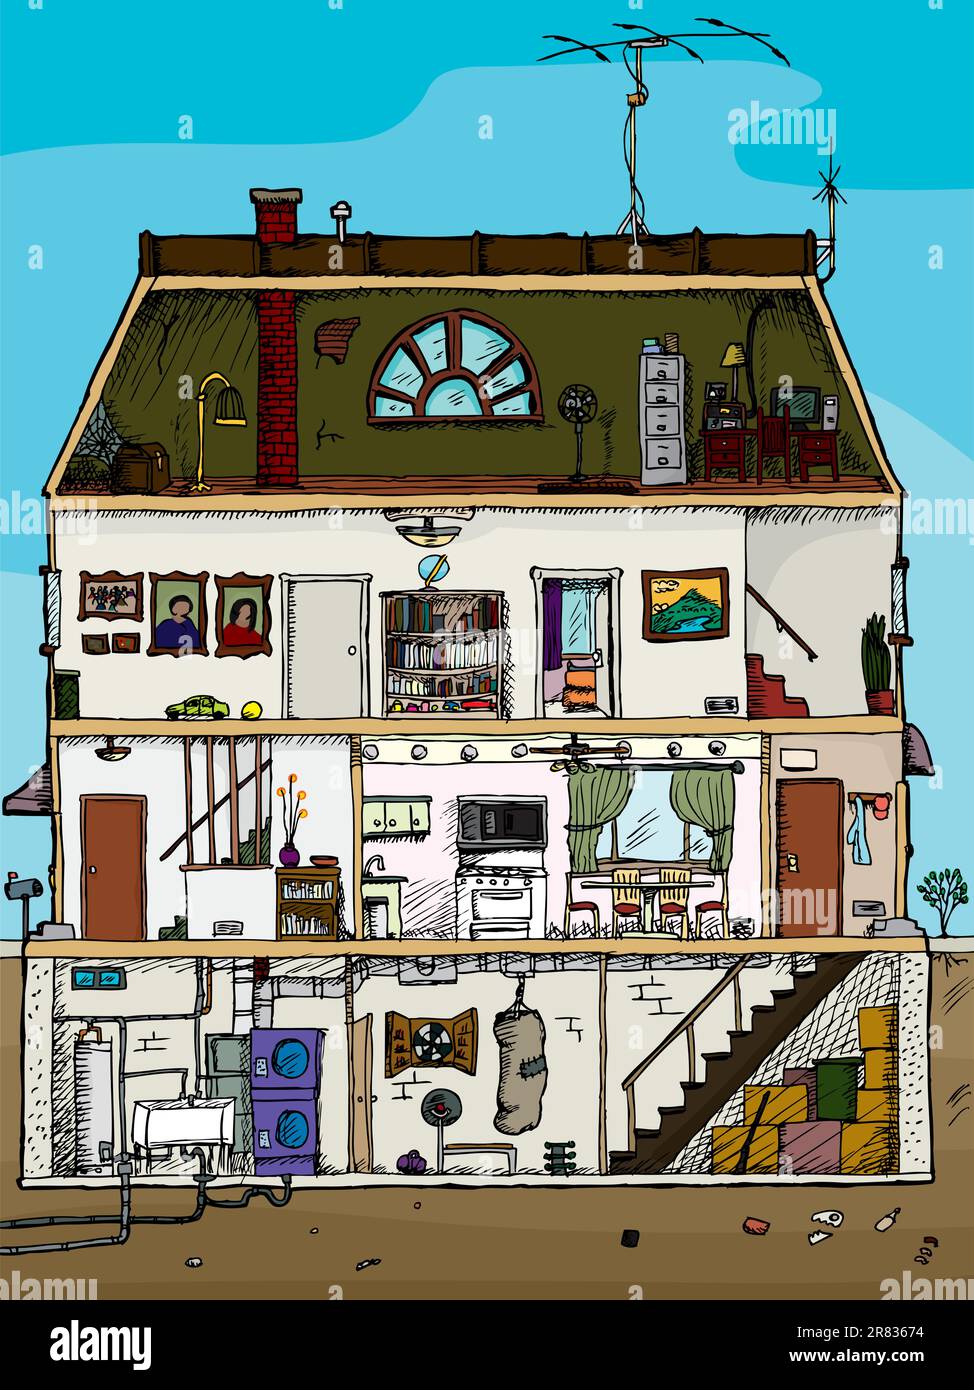 3-story old house cartoon cross section with basement Stock Vector